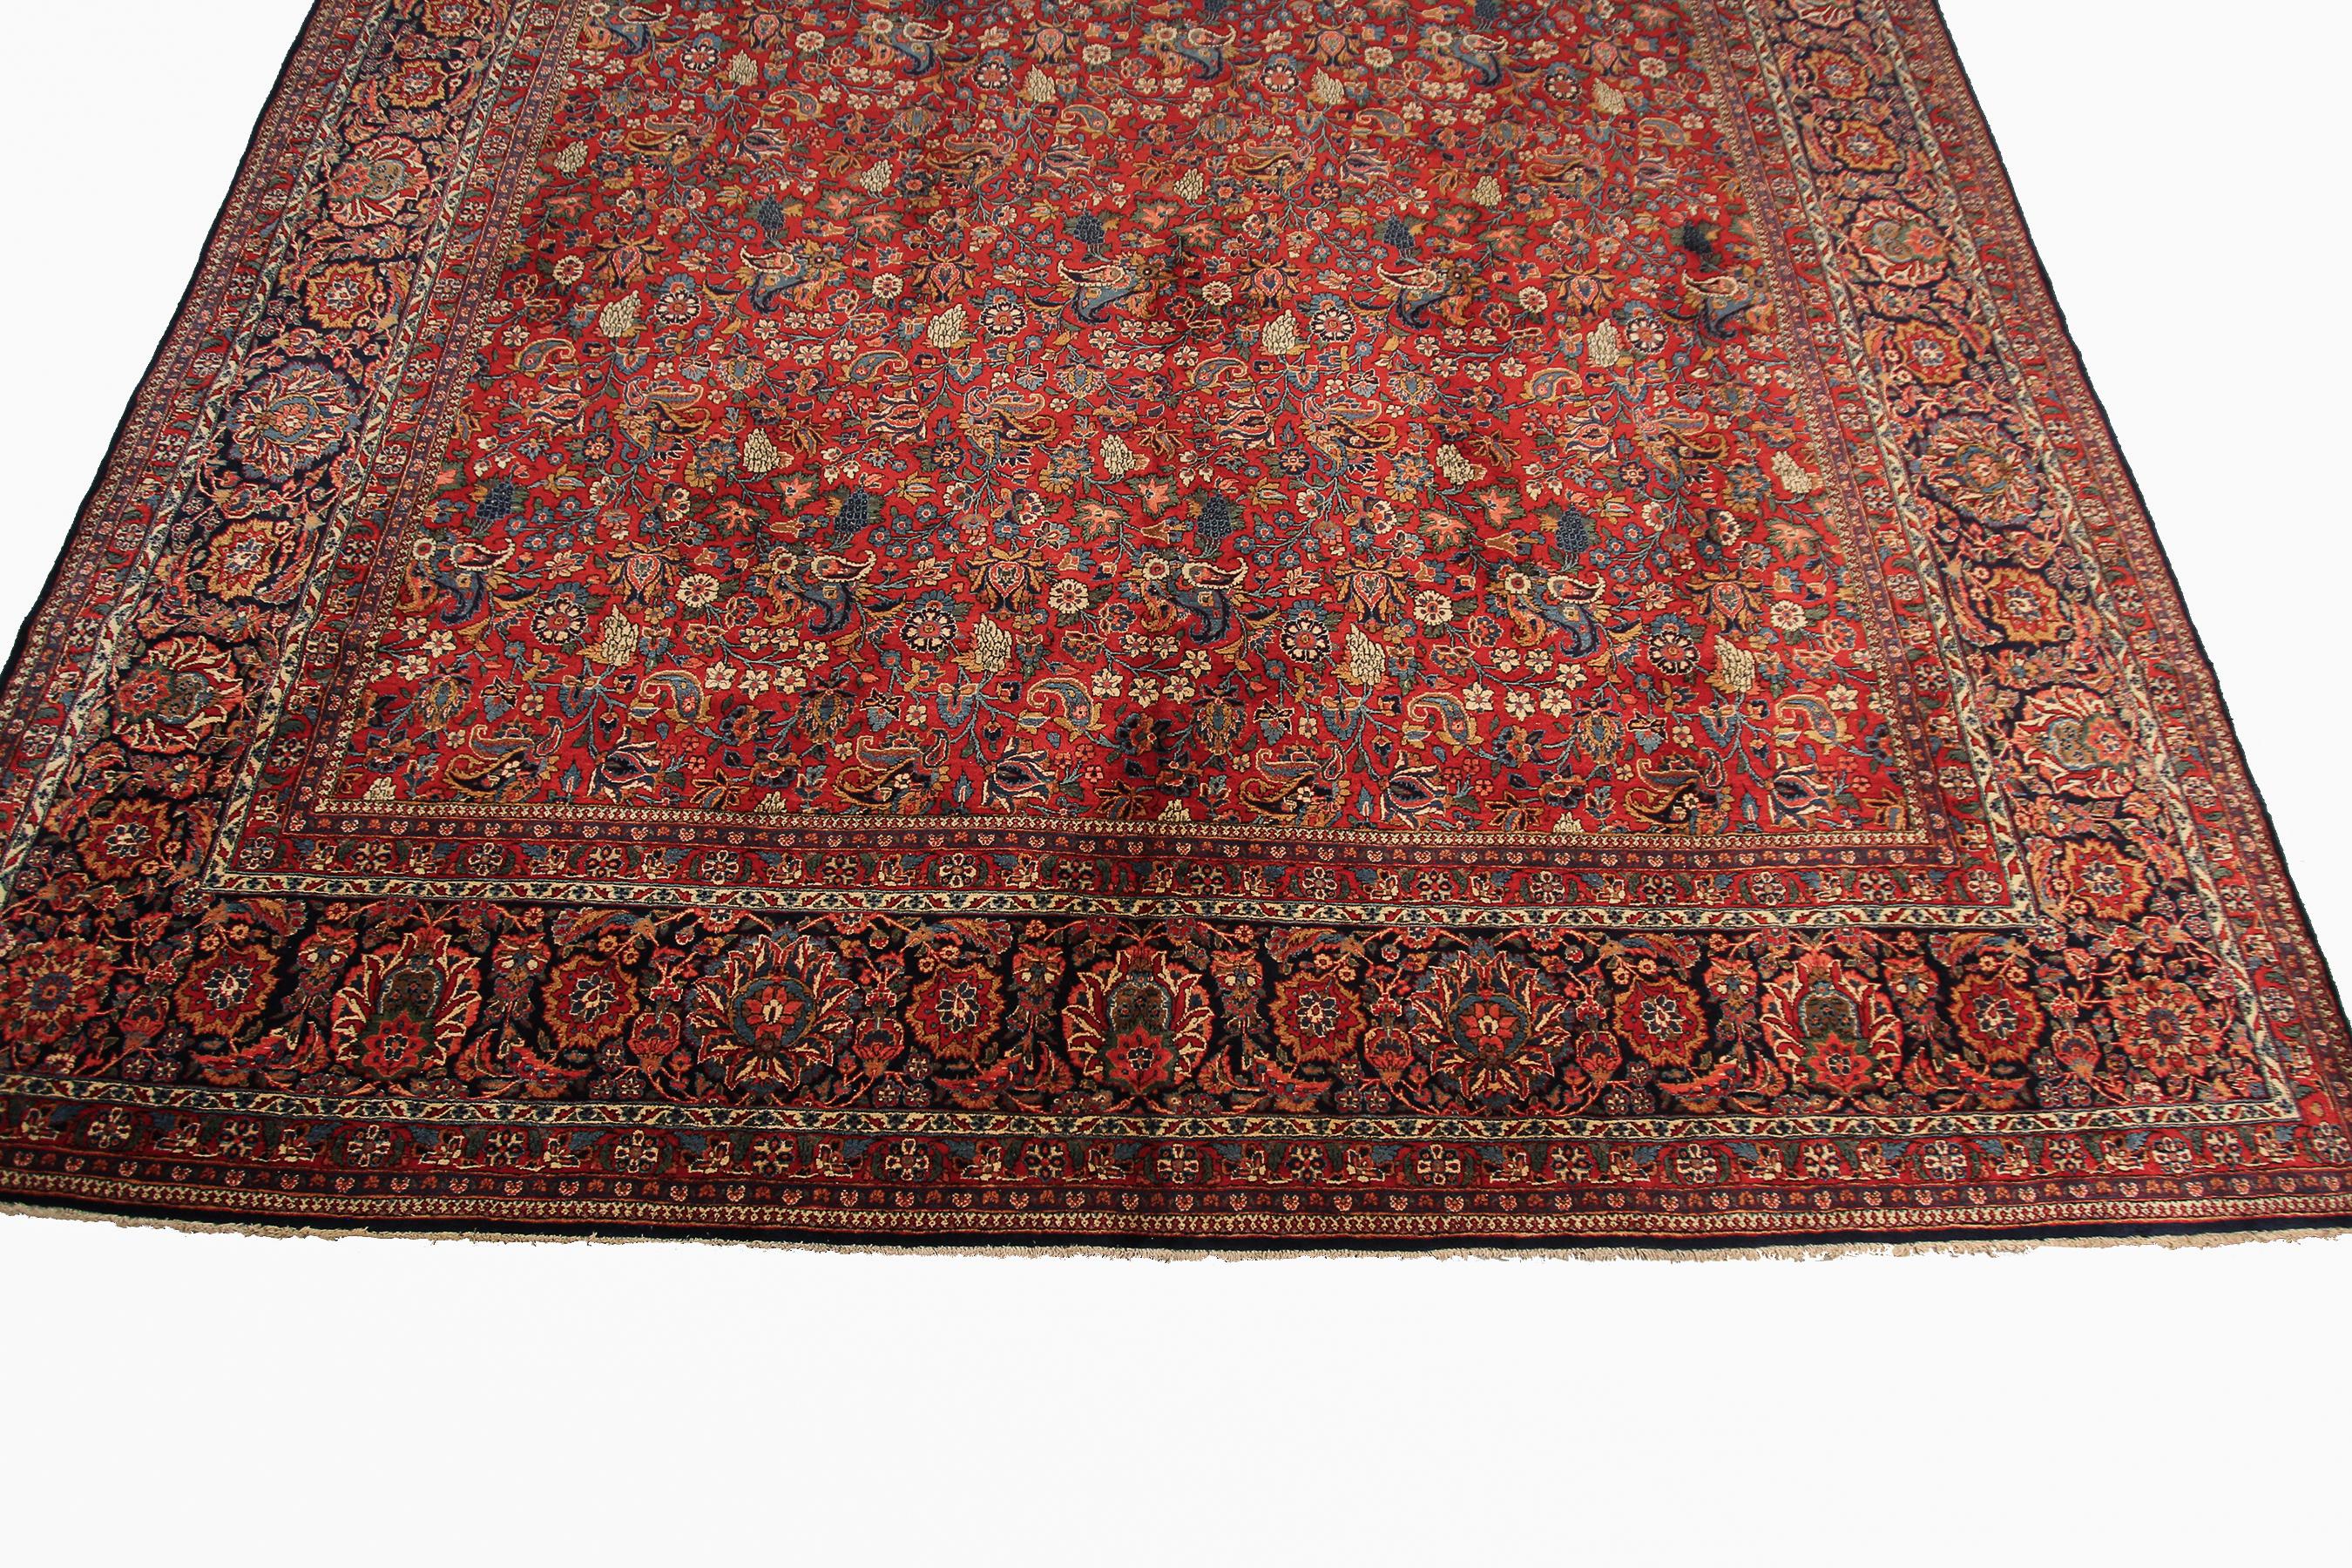 Antique Persian Dabir Kashan Rug Kork Wool Geometric Overall In Excellent Condition For Sale In New York, NY